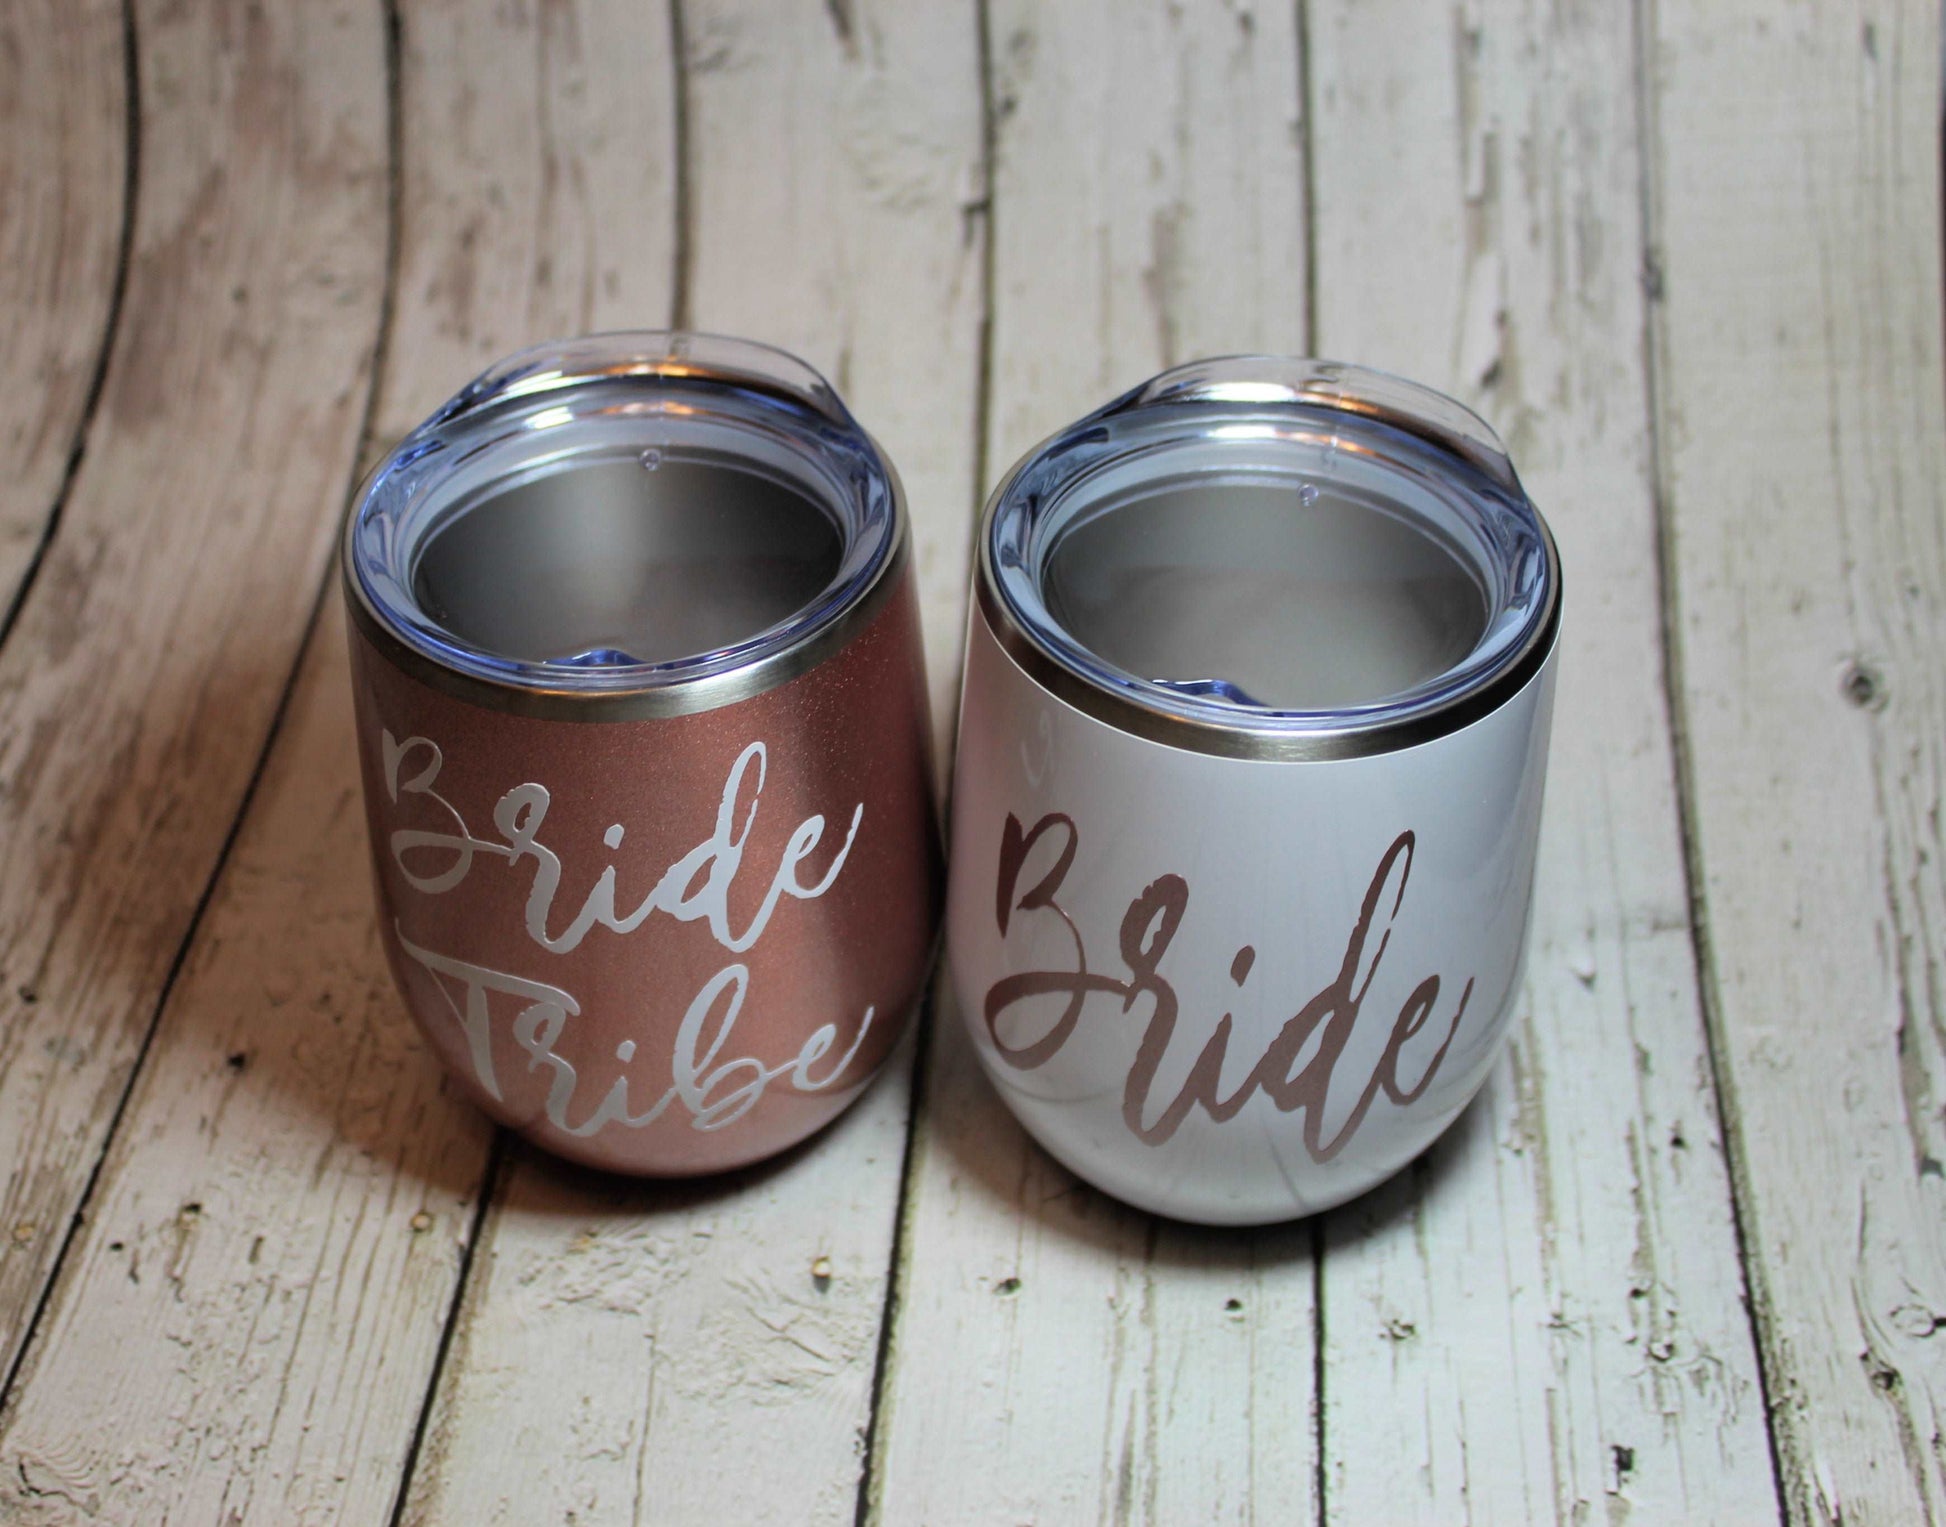 Bride Tribe Stainless Steel Wine Tumbler freeshipping - Be Vocal Designs